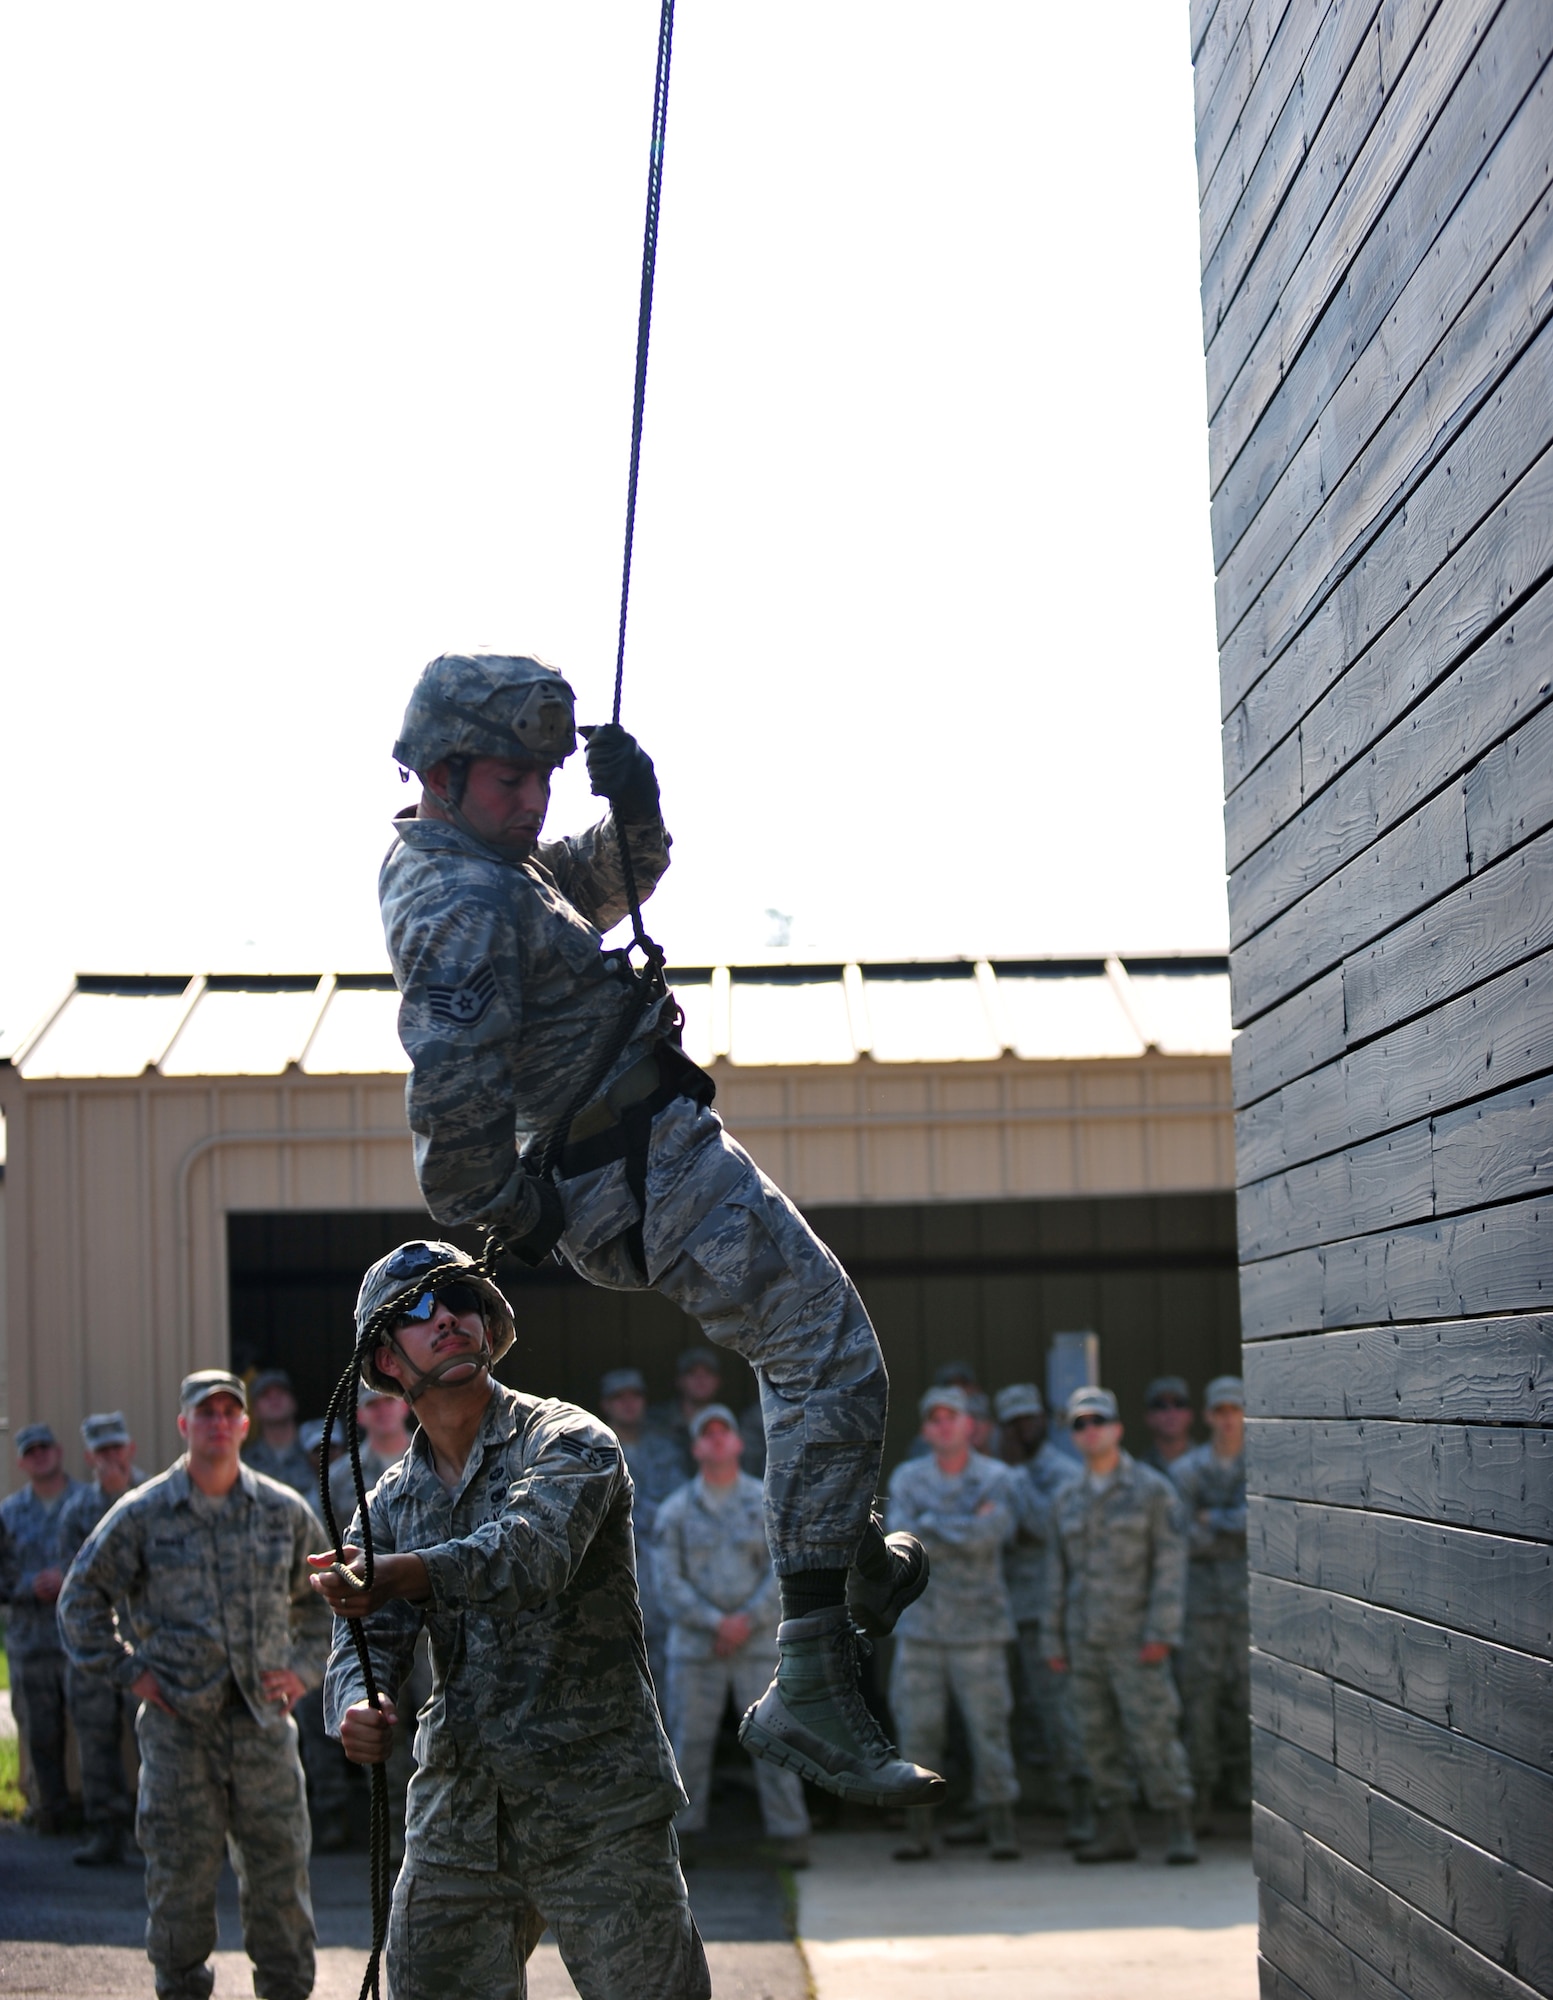 U.S. Air Force Staff Sgt. Moses Palermo and Senior Airman Dylan Vankerckhoven, 820th Base Defense Group, perform a rappel demonstration for Chief Master Sgt. Rick Parsons, command chief of Air Combat Command, during his visit to Moody Air Force Base, Ga., Aug. 2, 2012. Parsons started his career at Moody in 1985 and later held leadership positions with the 820th Security Forces Group (now the 820th Base Defense Group) in the late 90s and early 2000s. (U.S. Air Force photo by Staff Sgt. Stephanie Mancha/Released) 